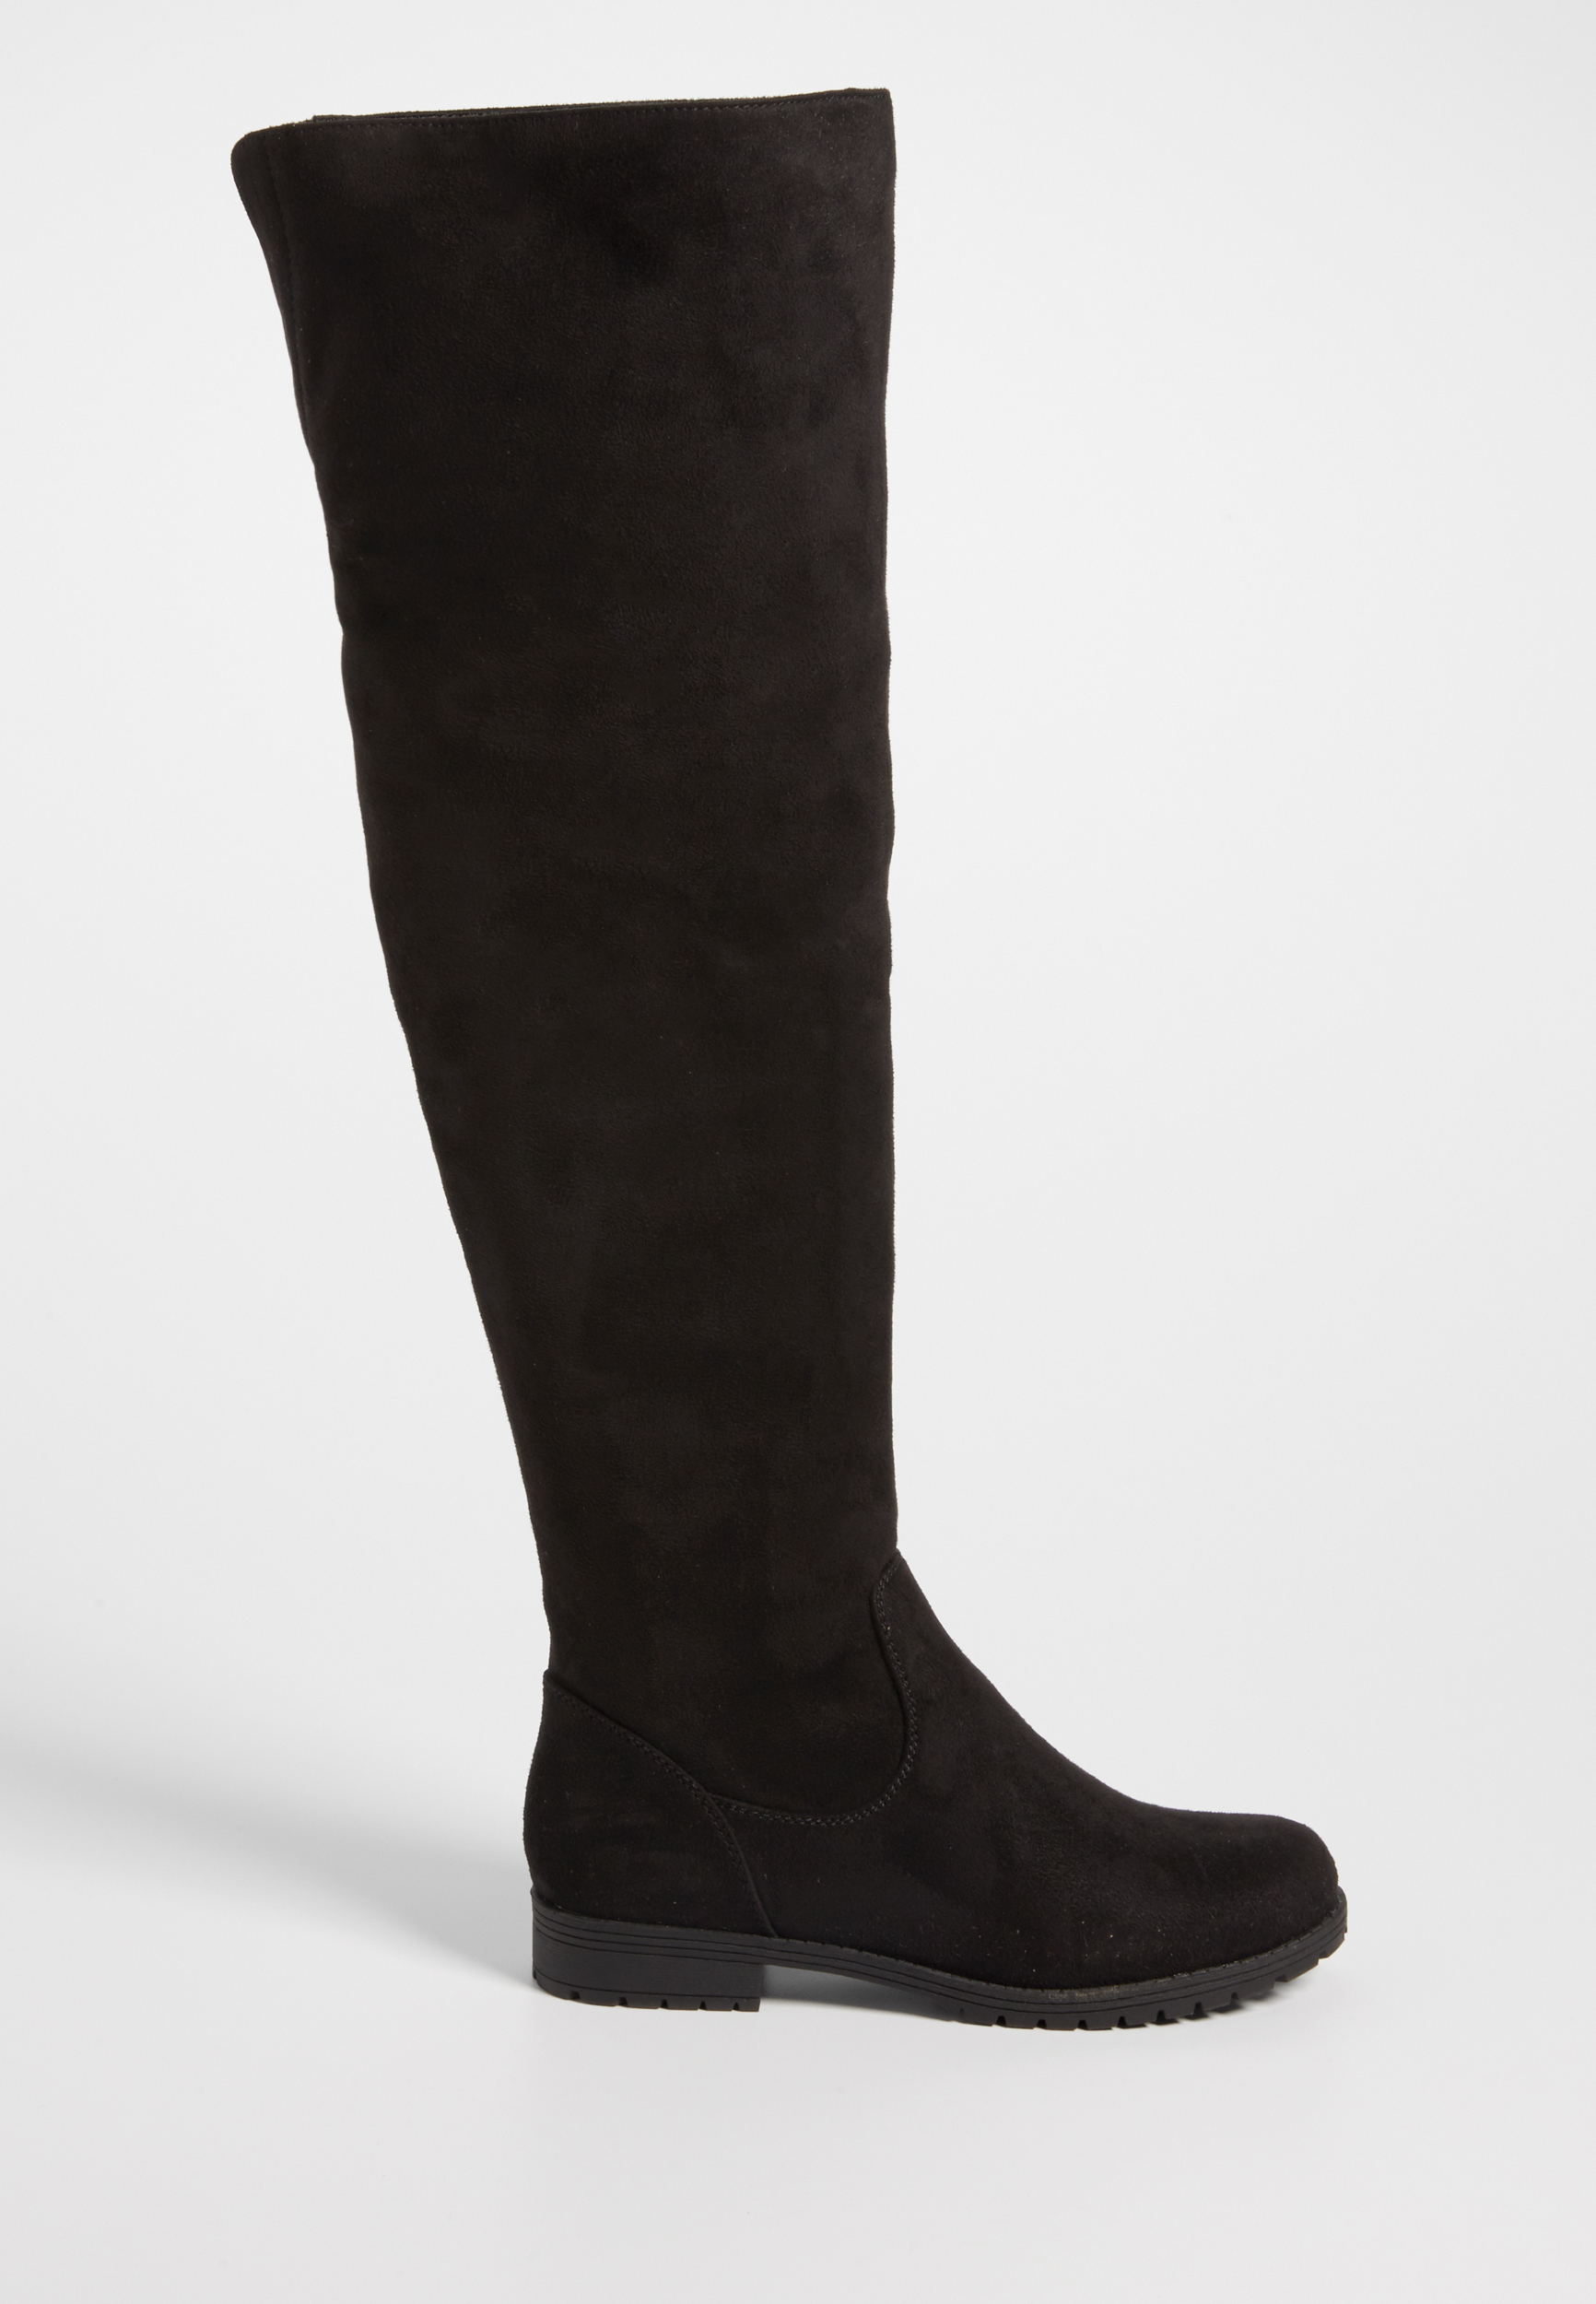 Sydney faux suede over the knee boot in black | maurices